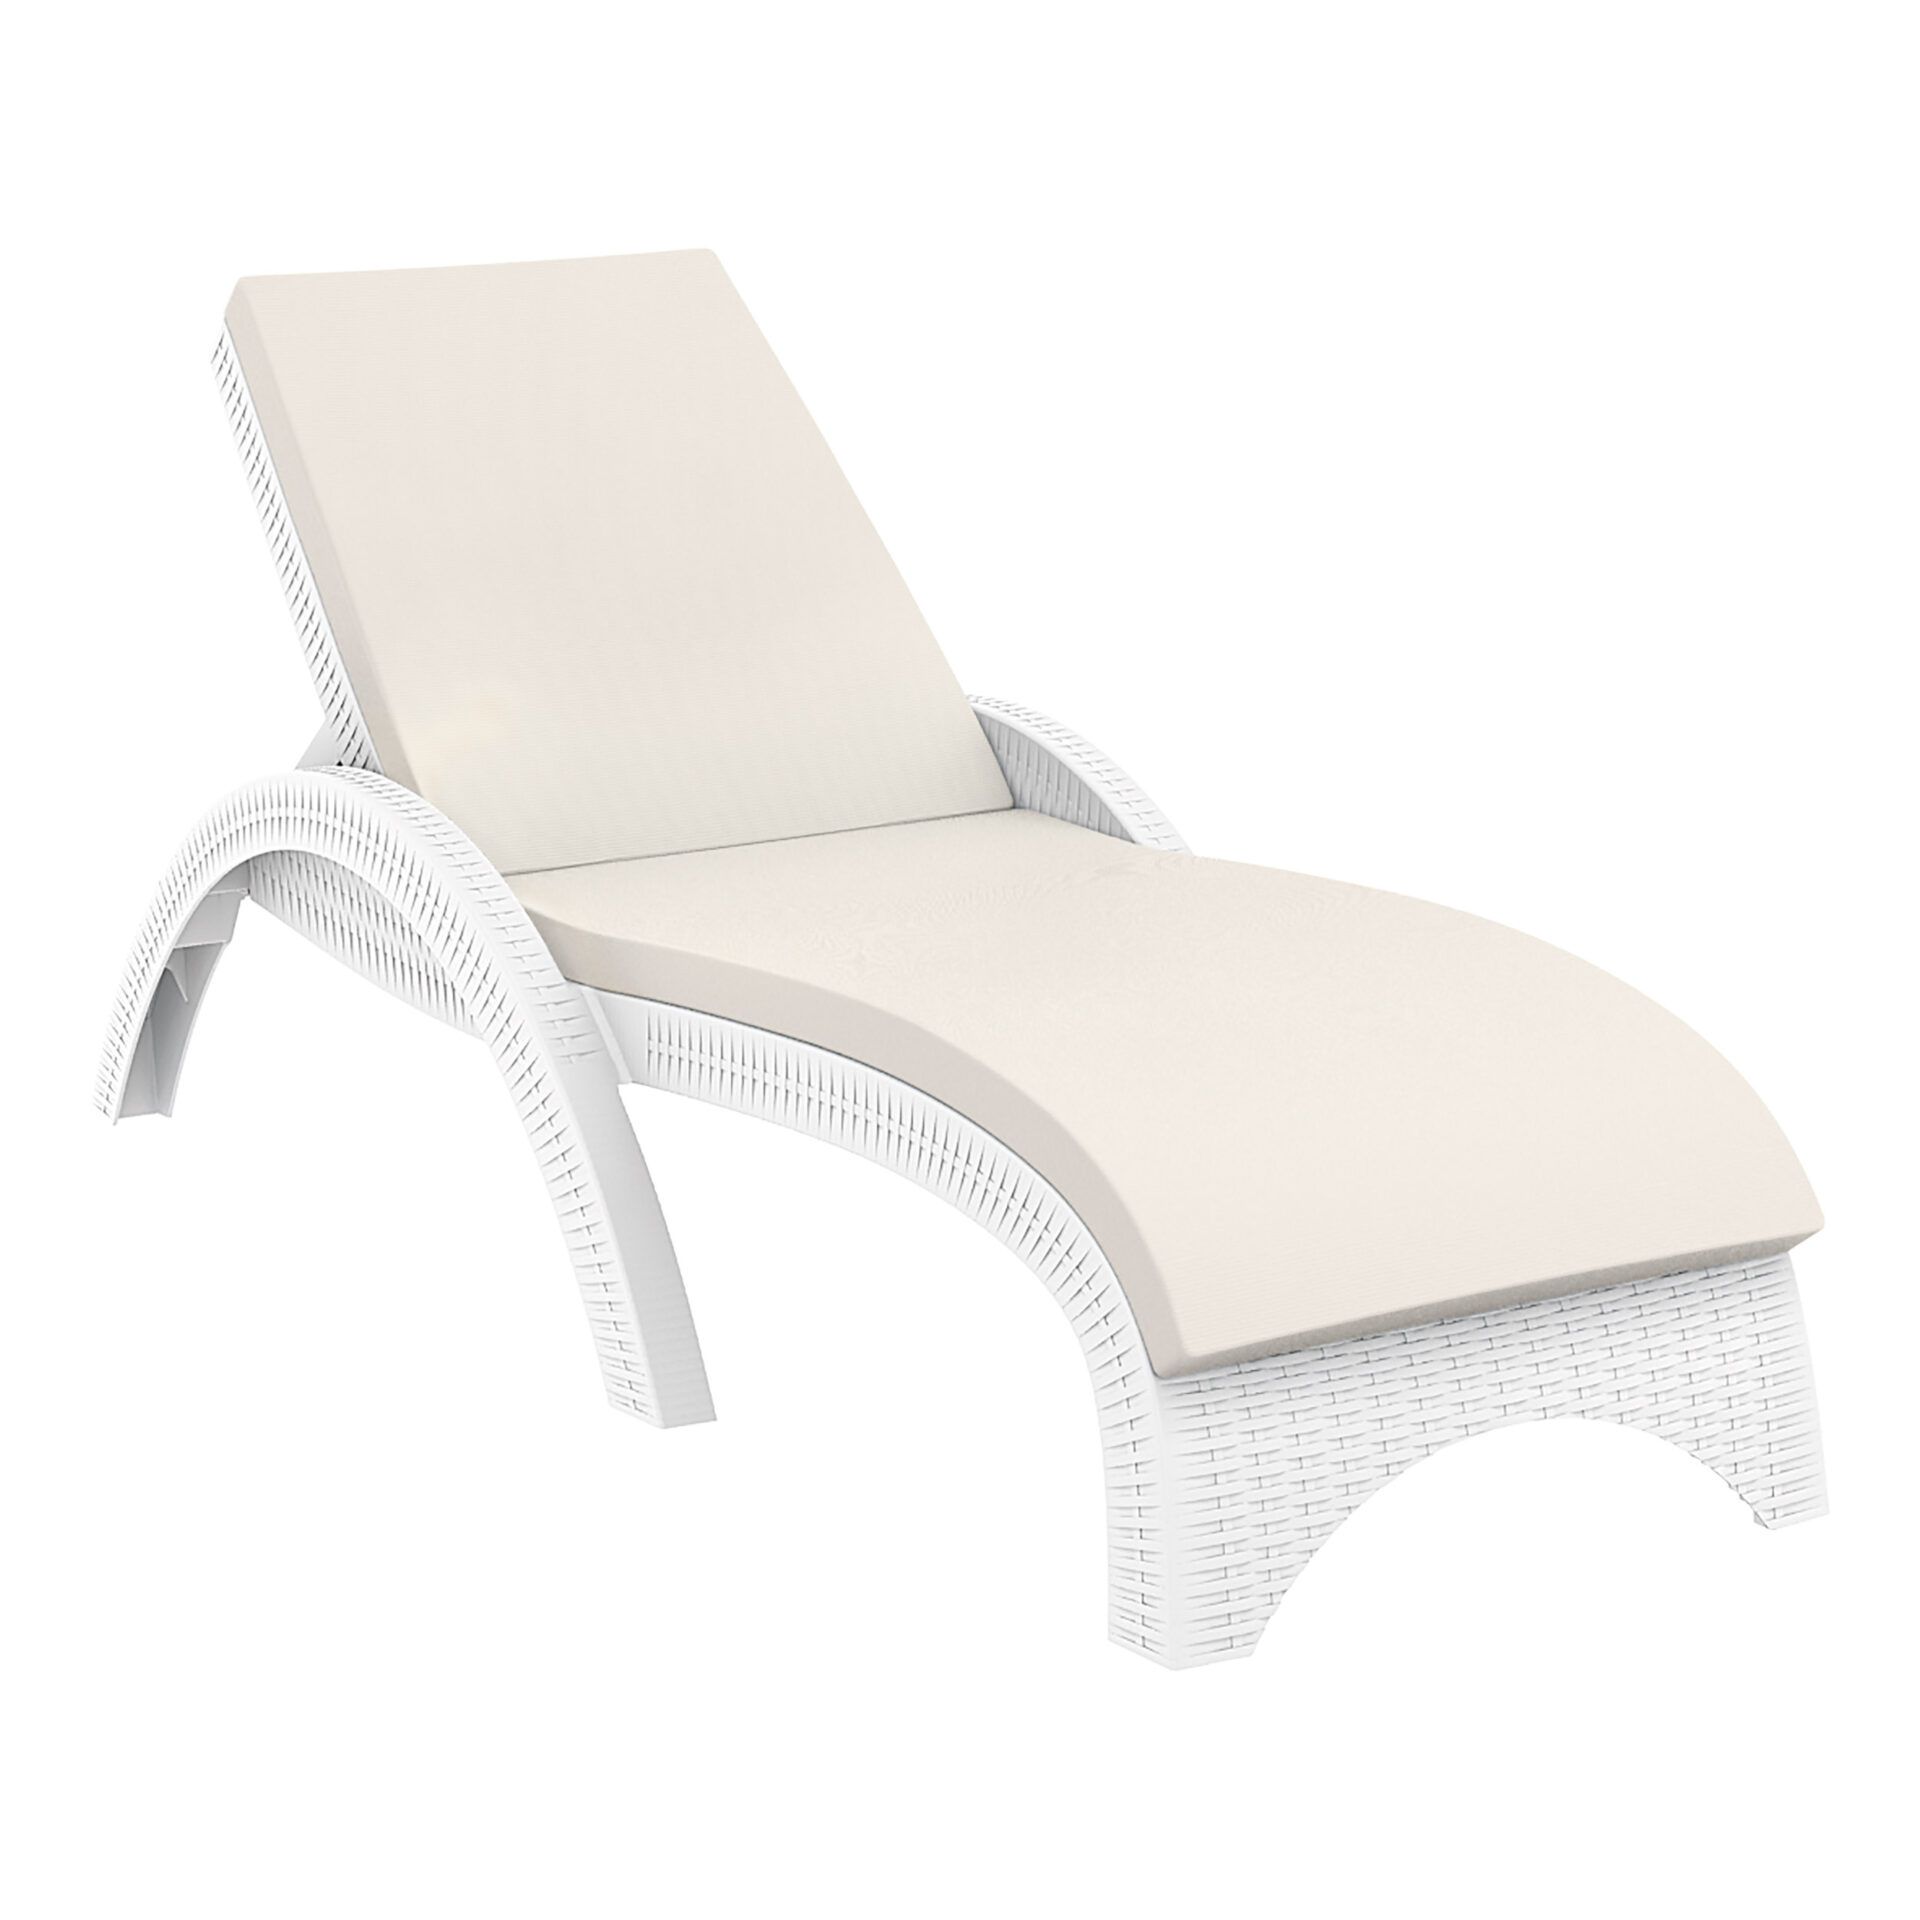 outdoor resin rattan fiji sunlounger cushion white front side